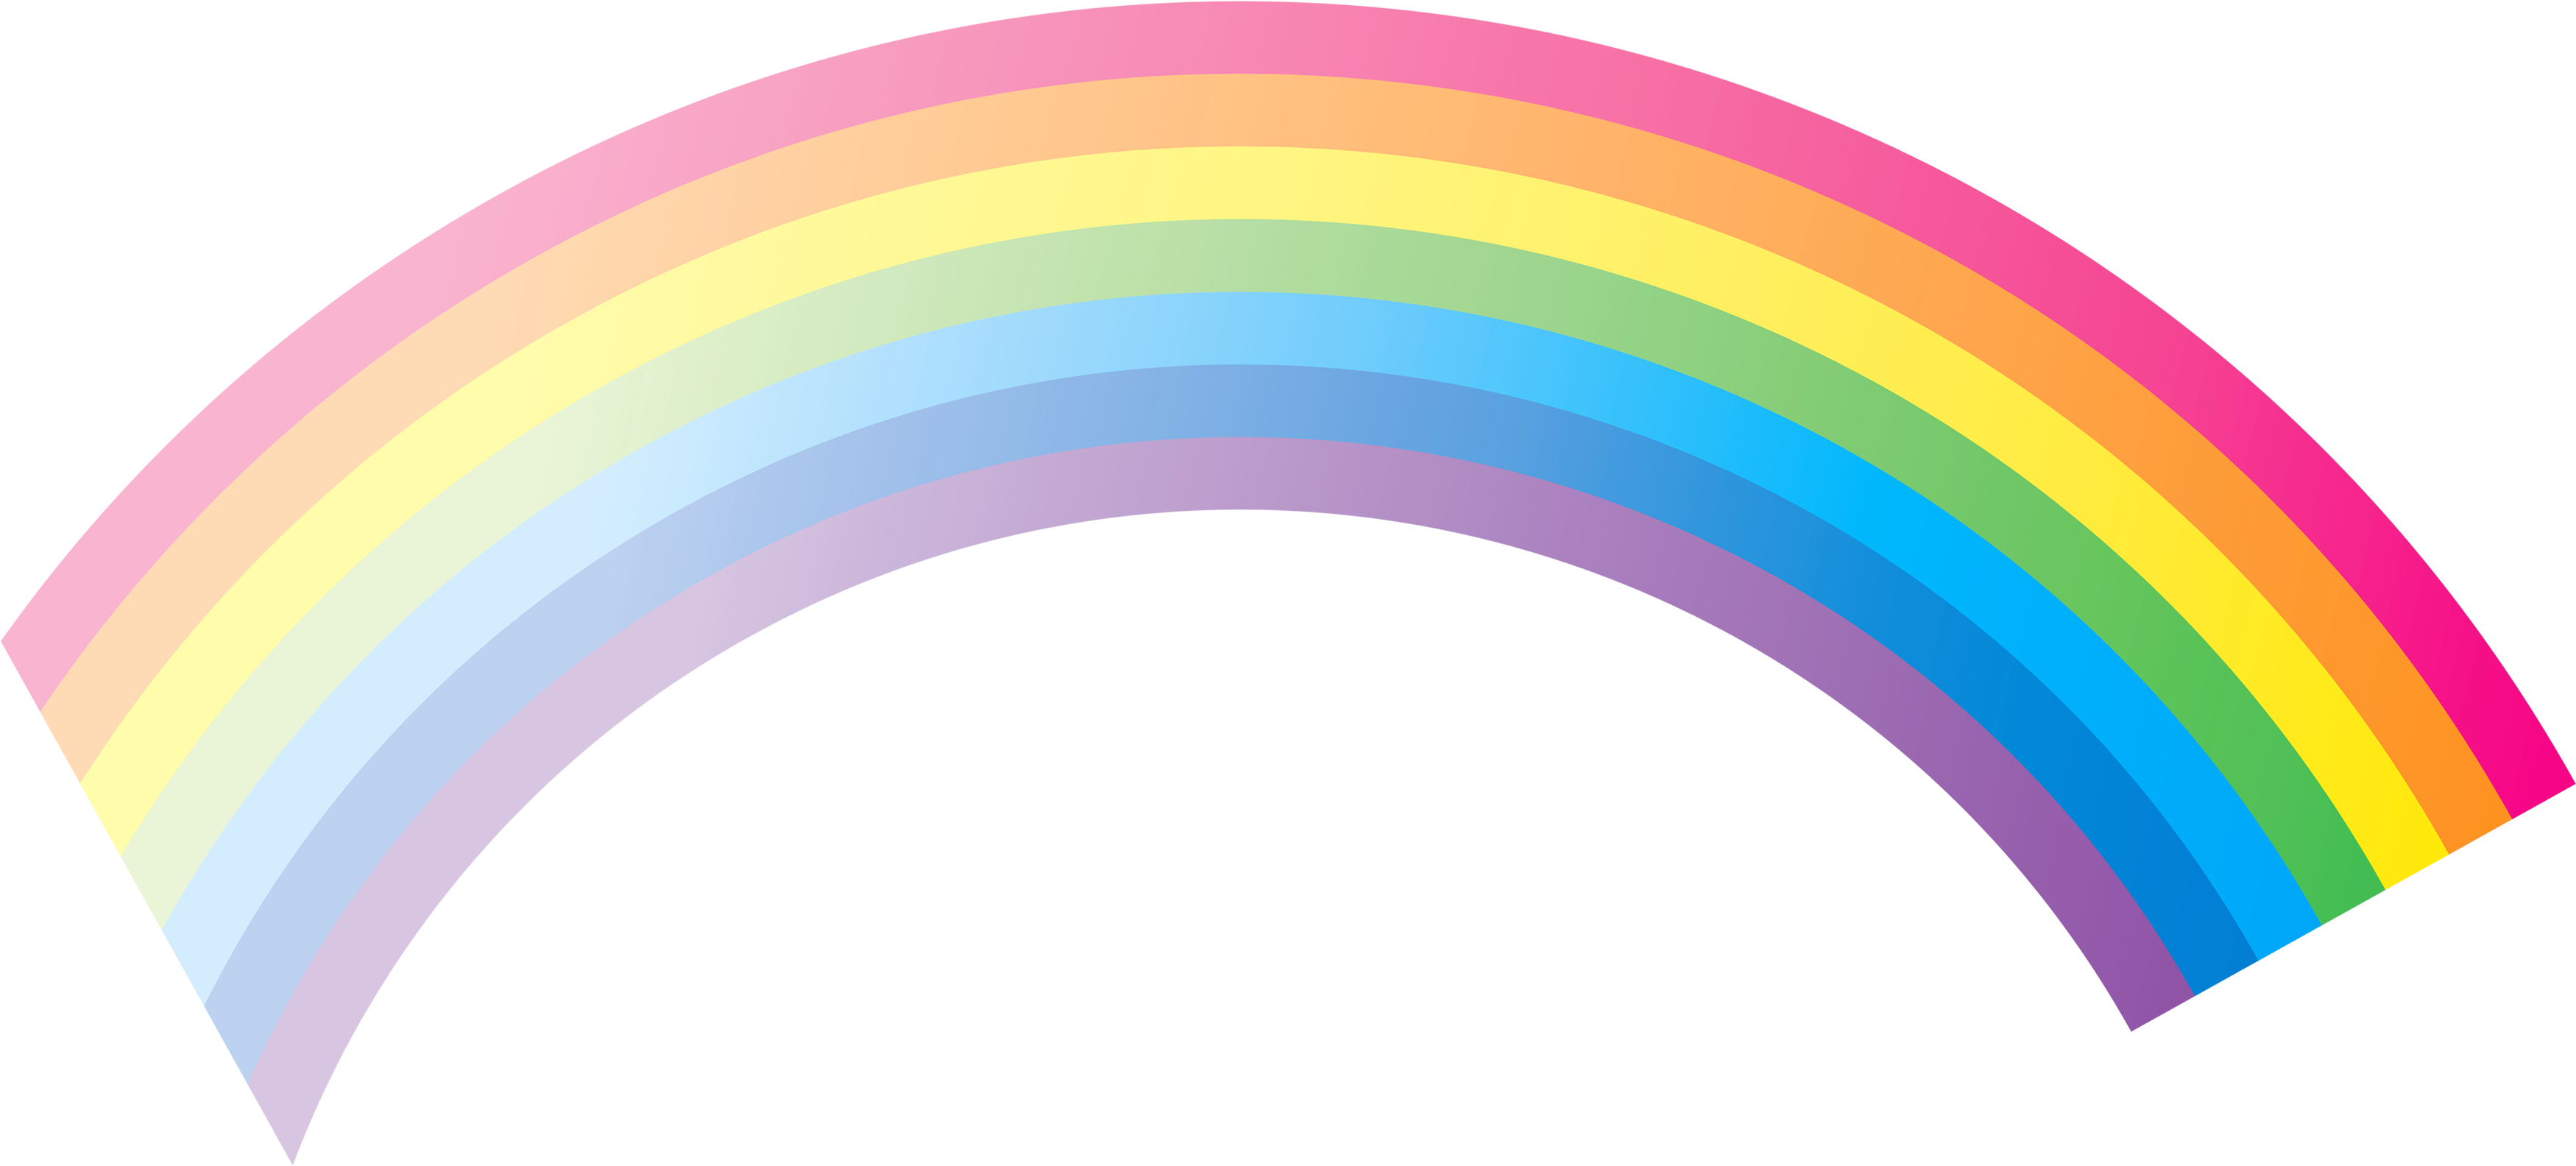 Rainbow Png Image - Rainbow With No Background (3500x1584)